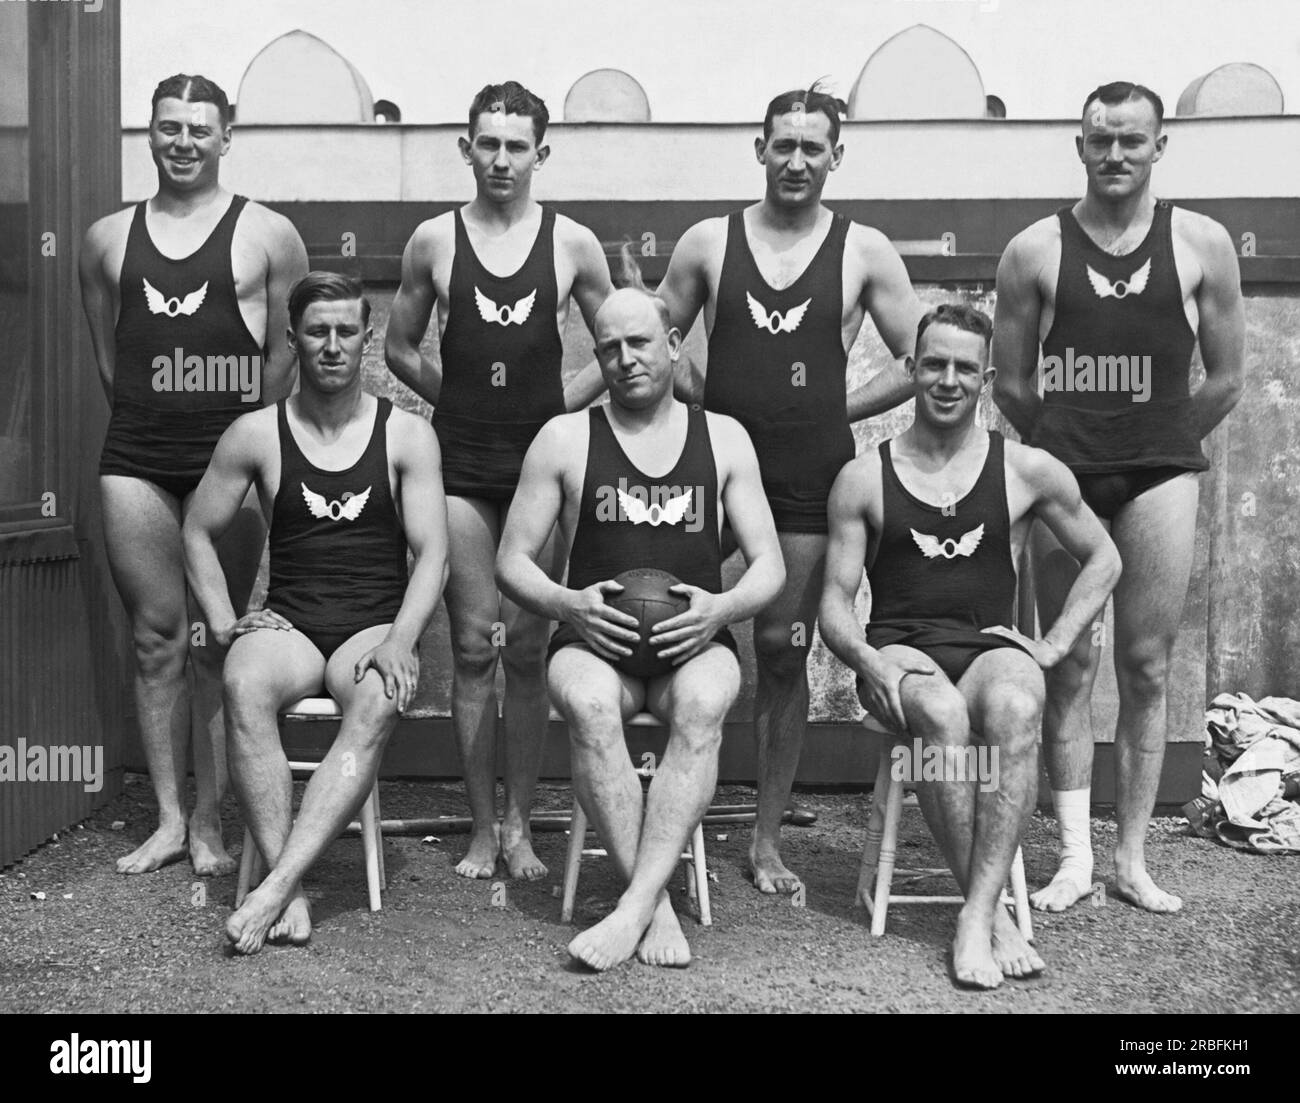 San Francisco, California:  1920 The San Francisco Olympic Club  Water Polo team, winner of the American title in 1920. Behind L-R: Gardner, Steiger, Resleure, Smith. Front L-R: Goodman, Carson, Schultz. They will go to Chicago for the Olympic swimming trials to be held in the Lincoln Park lagoon and will probably be part of the United States team at the Olympic Games in Belgium. Stock Photo